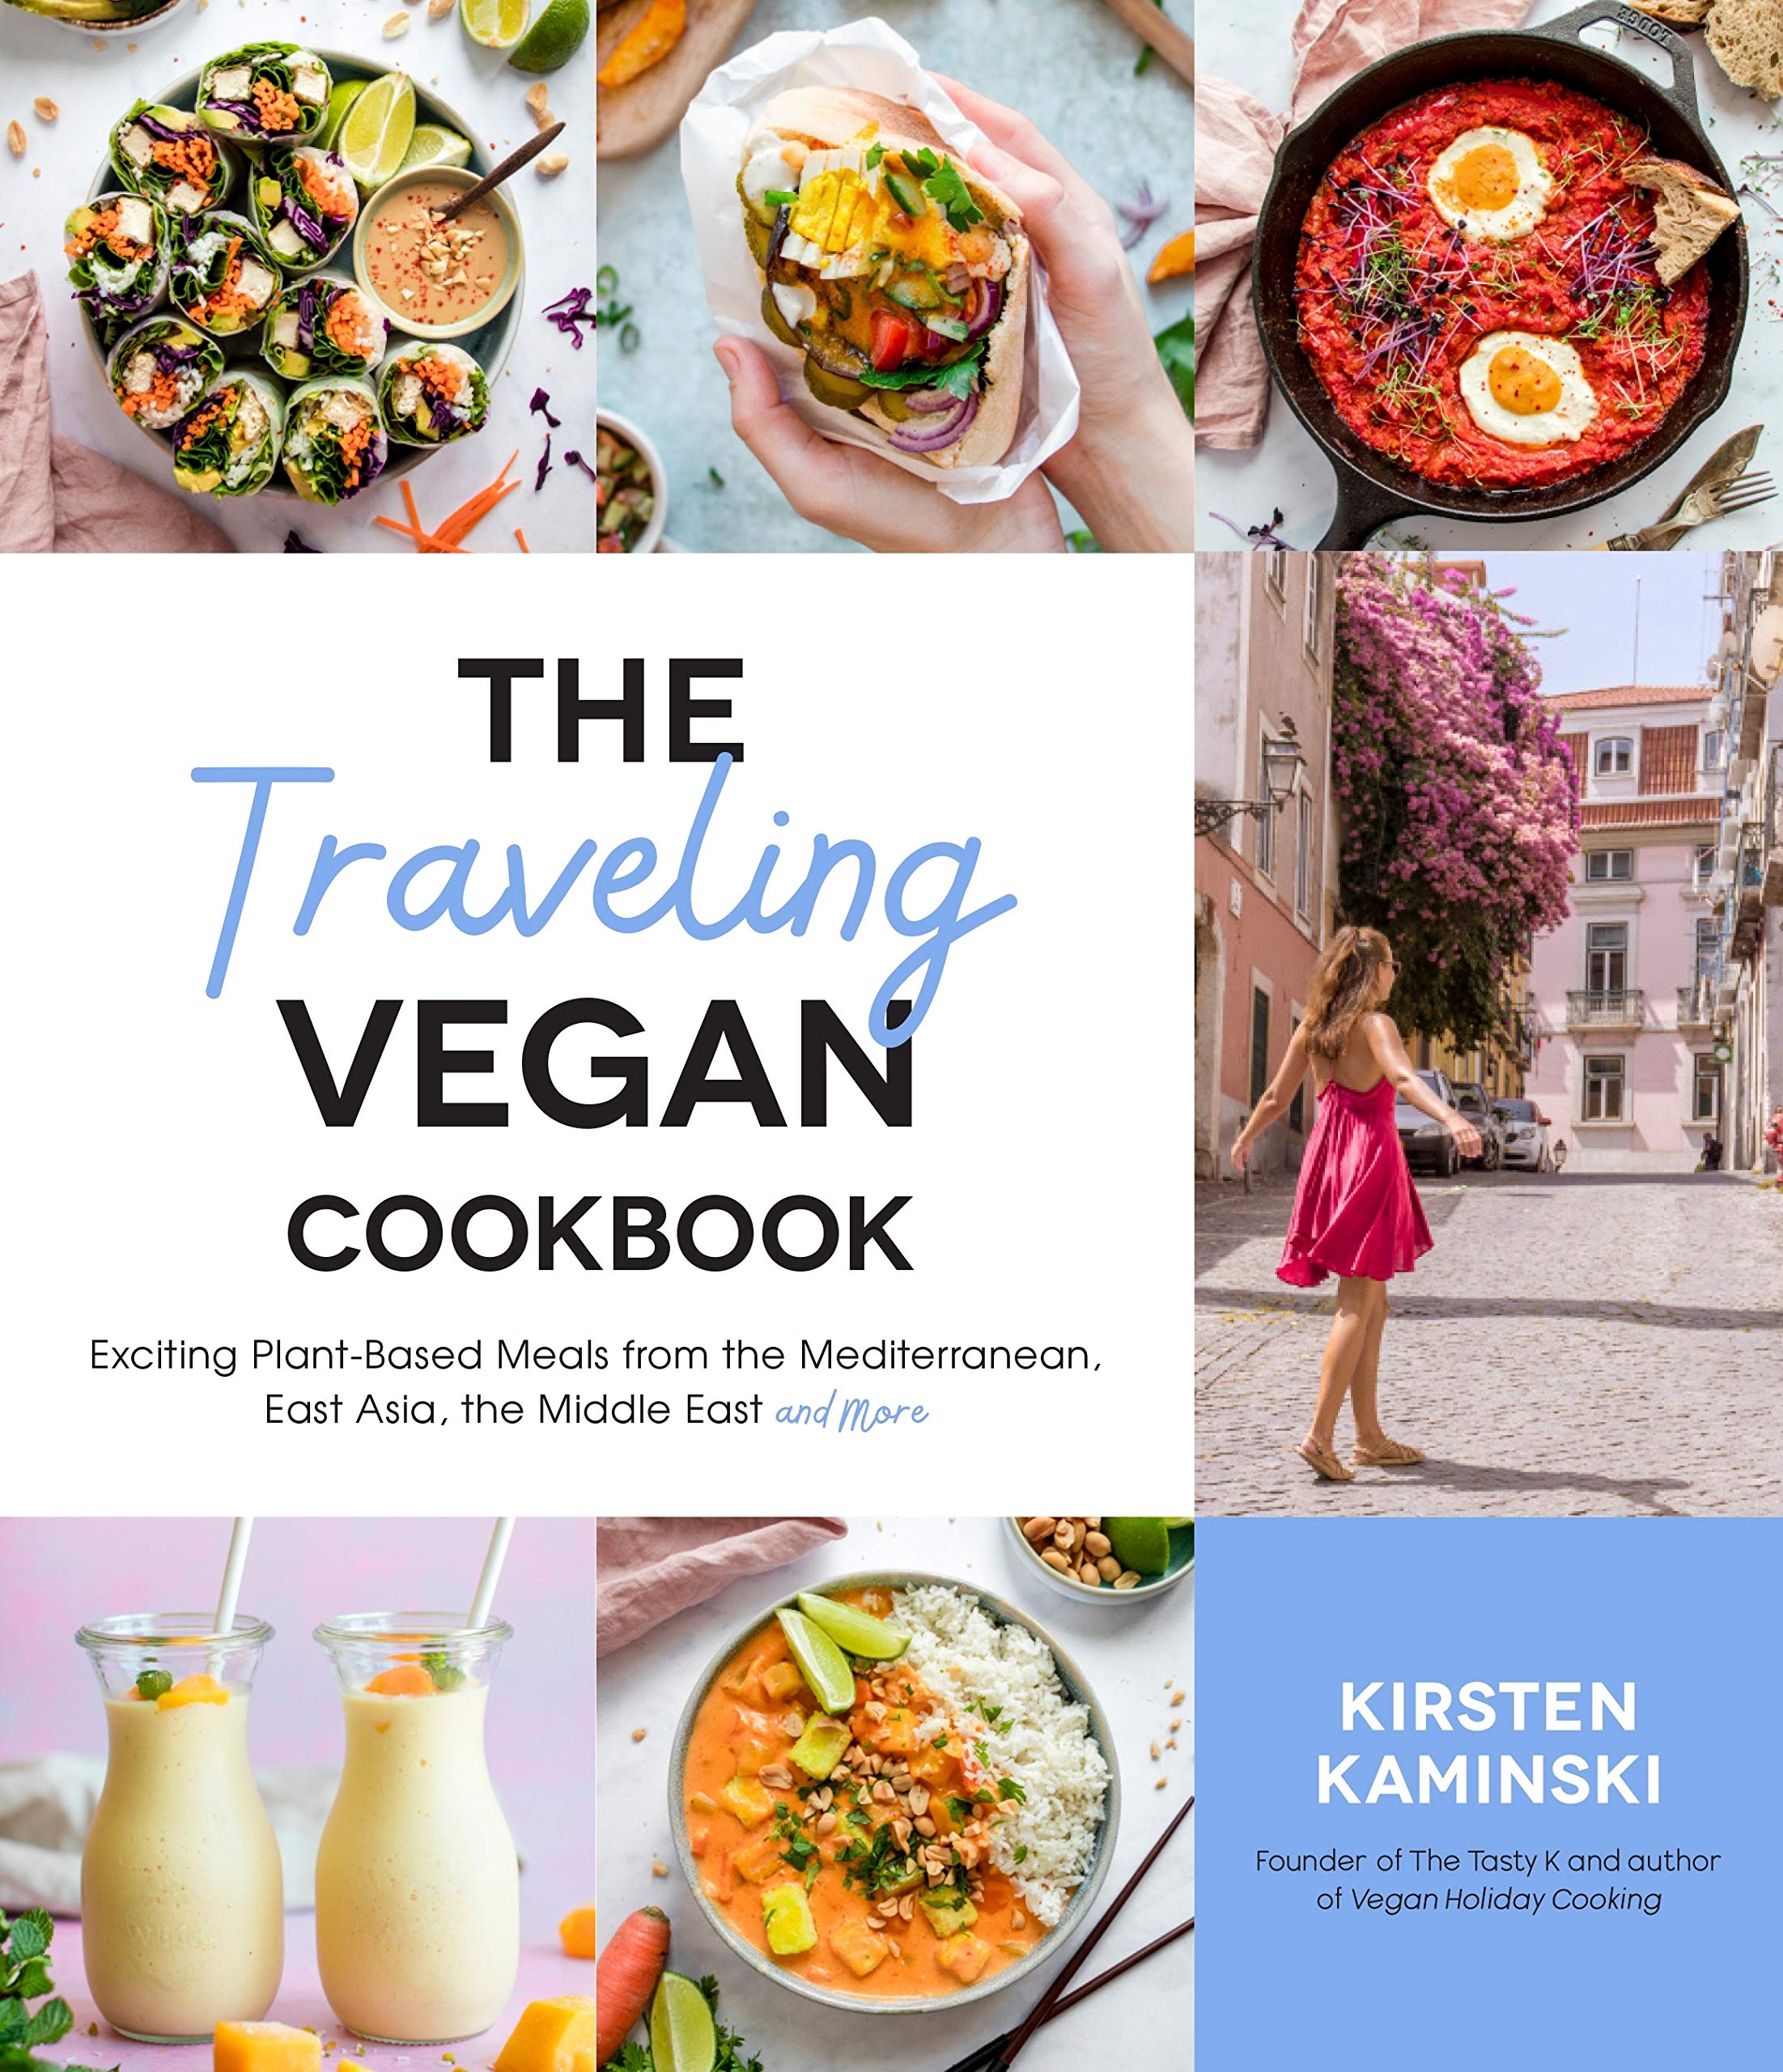 The Traveling Vegan Cookbook: Exciting Plant-Based Meals from the Mediterranean, East Asia, the Middle East and More (Kristen Kaminski)